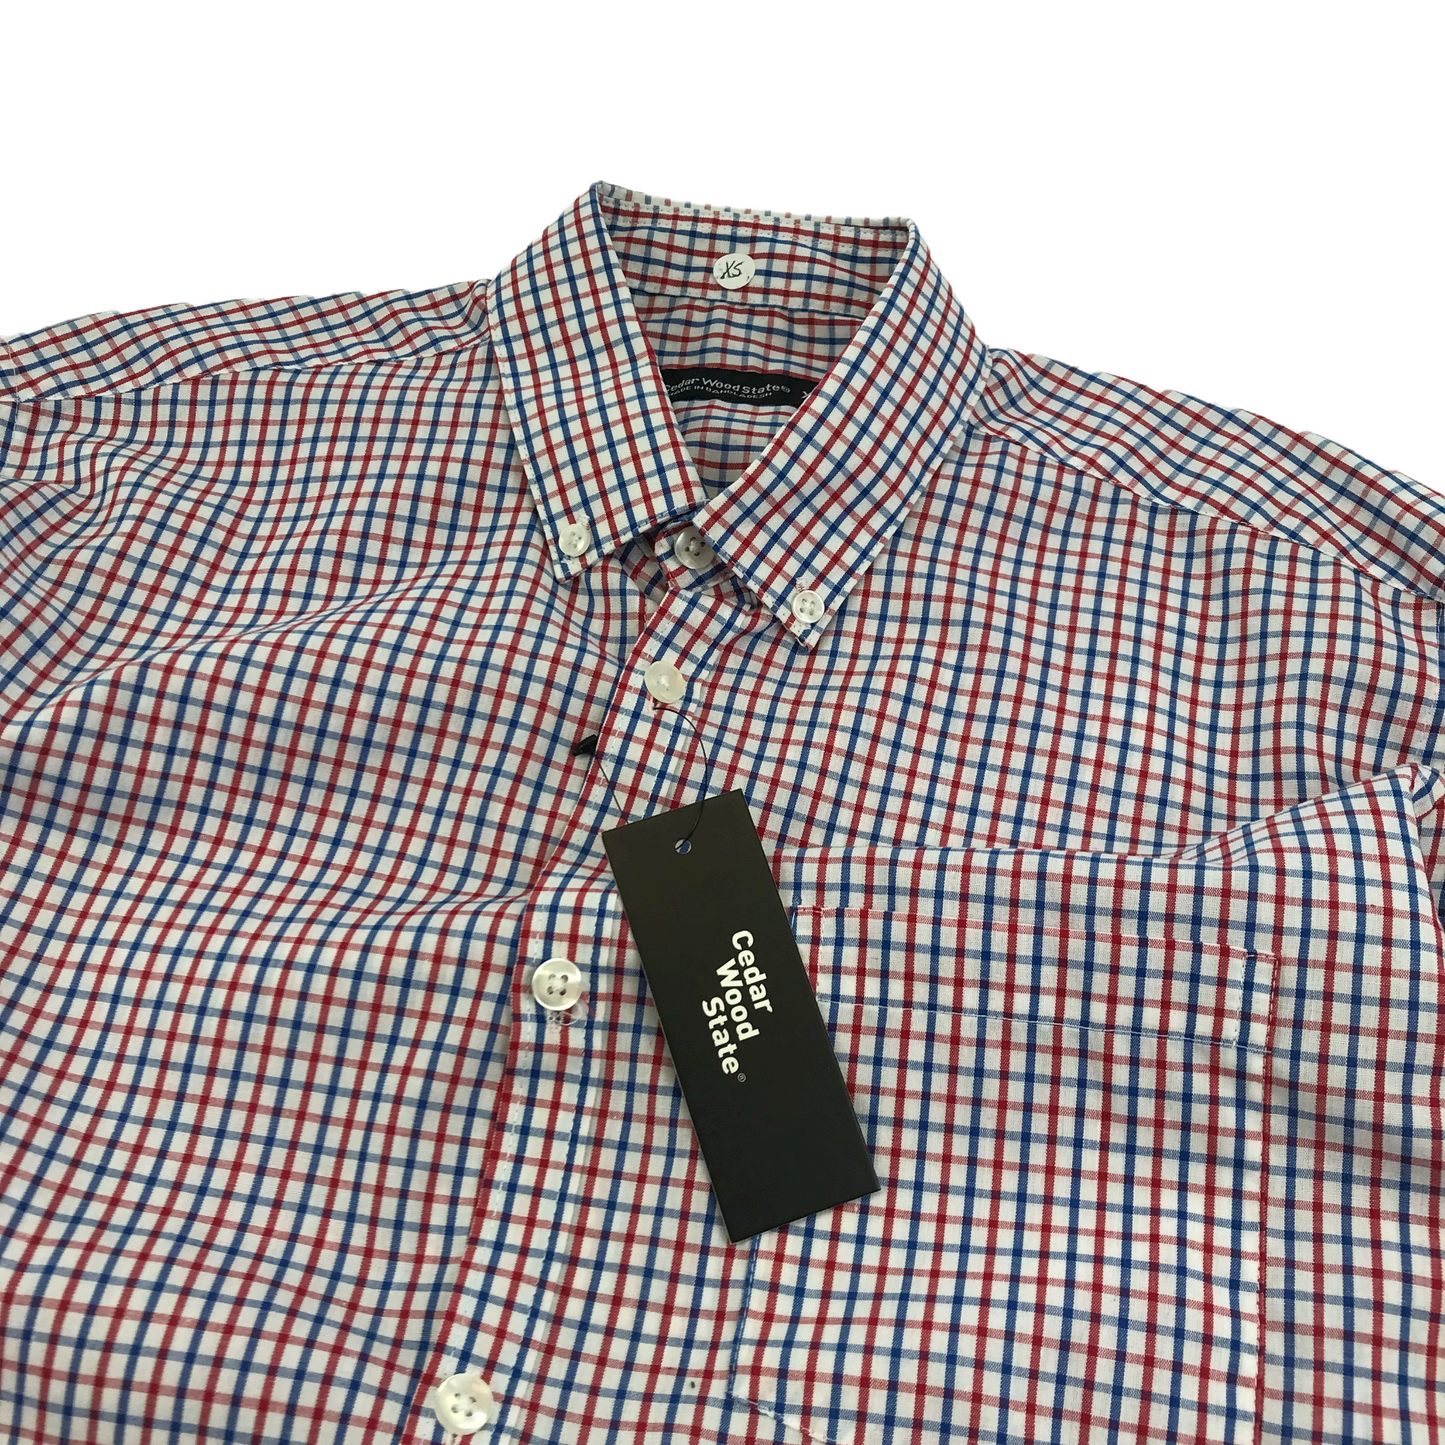 Primark Red and Blue Checked Shirt Men's XS